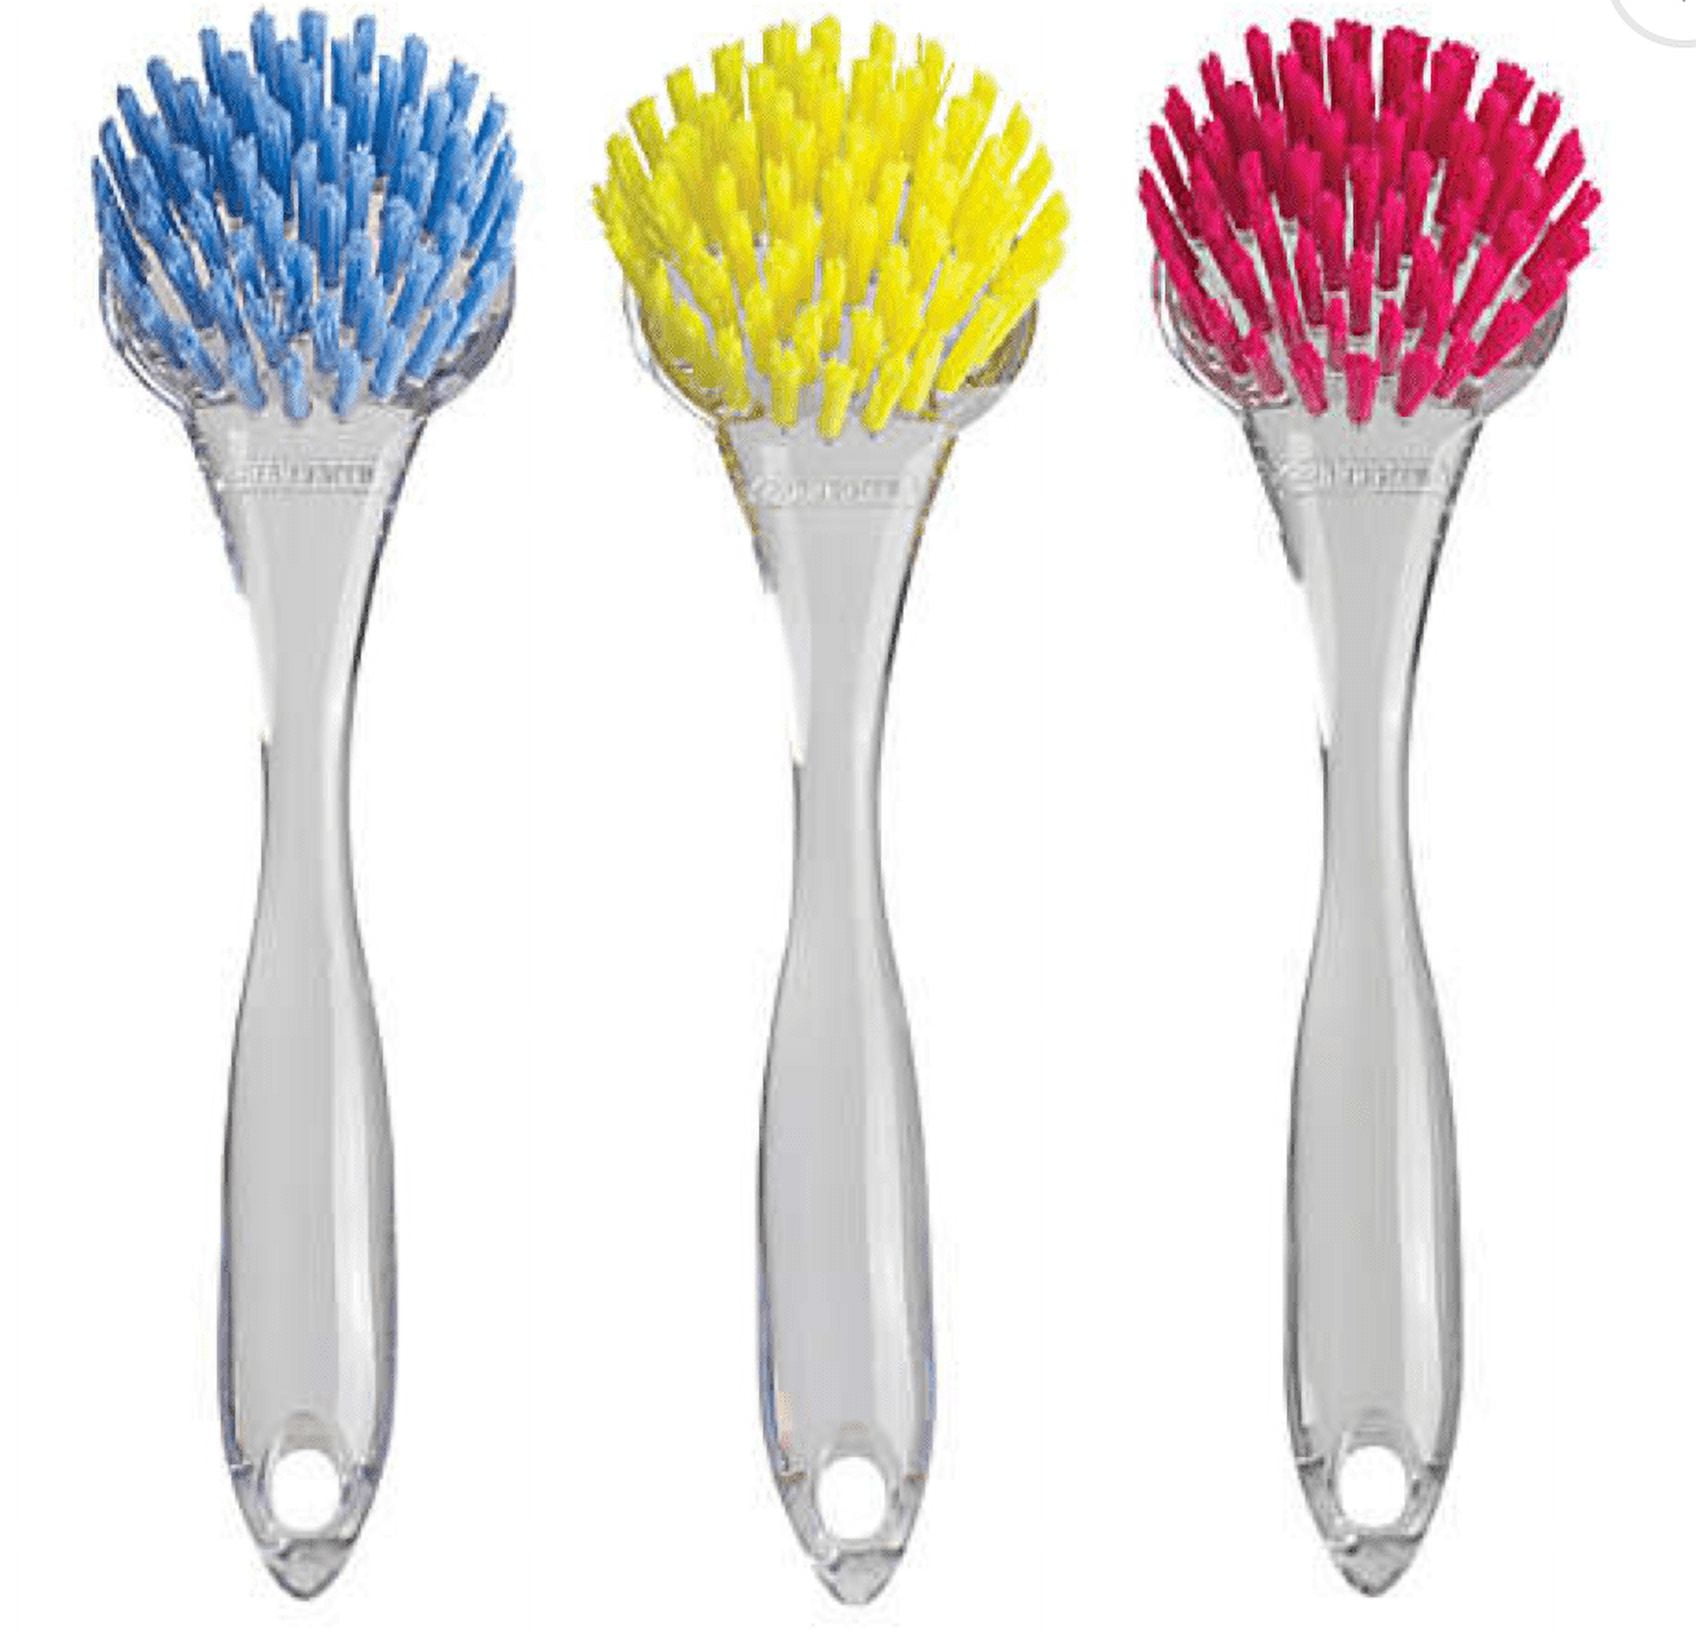 Casabella Round Dish Brush – Sold Individually - Assorted Colors 1024